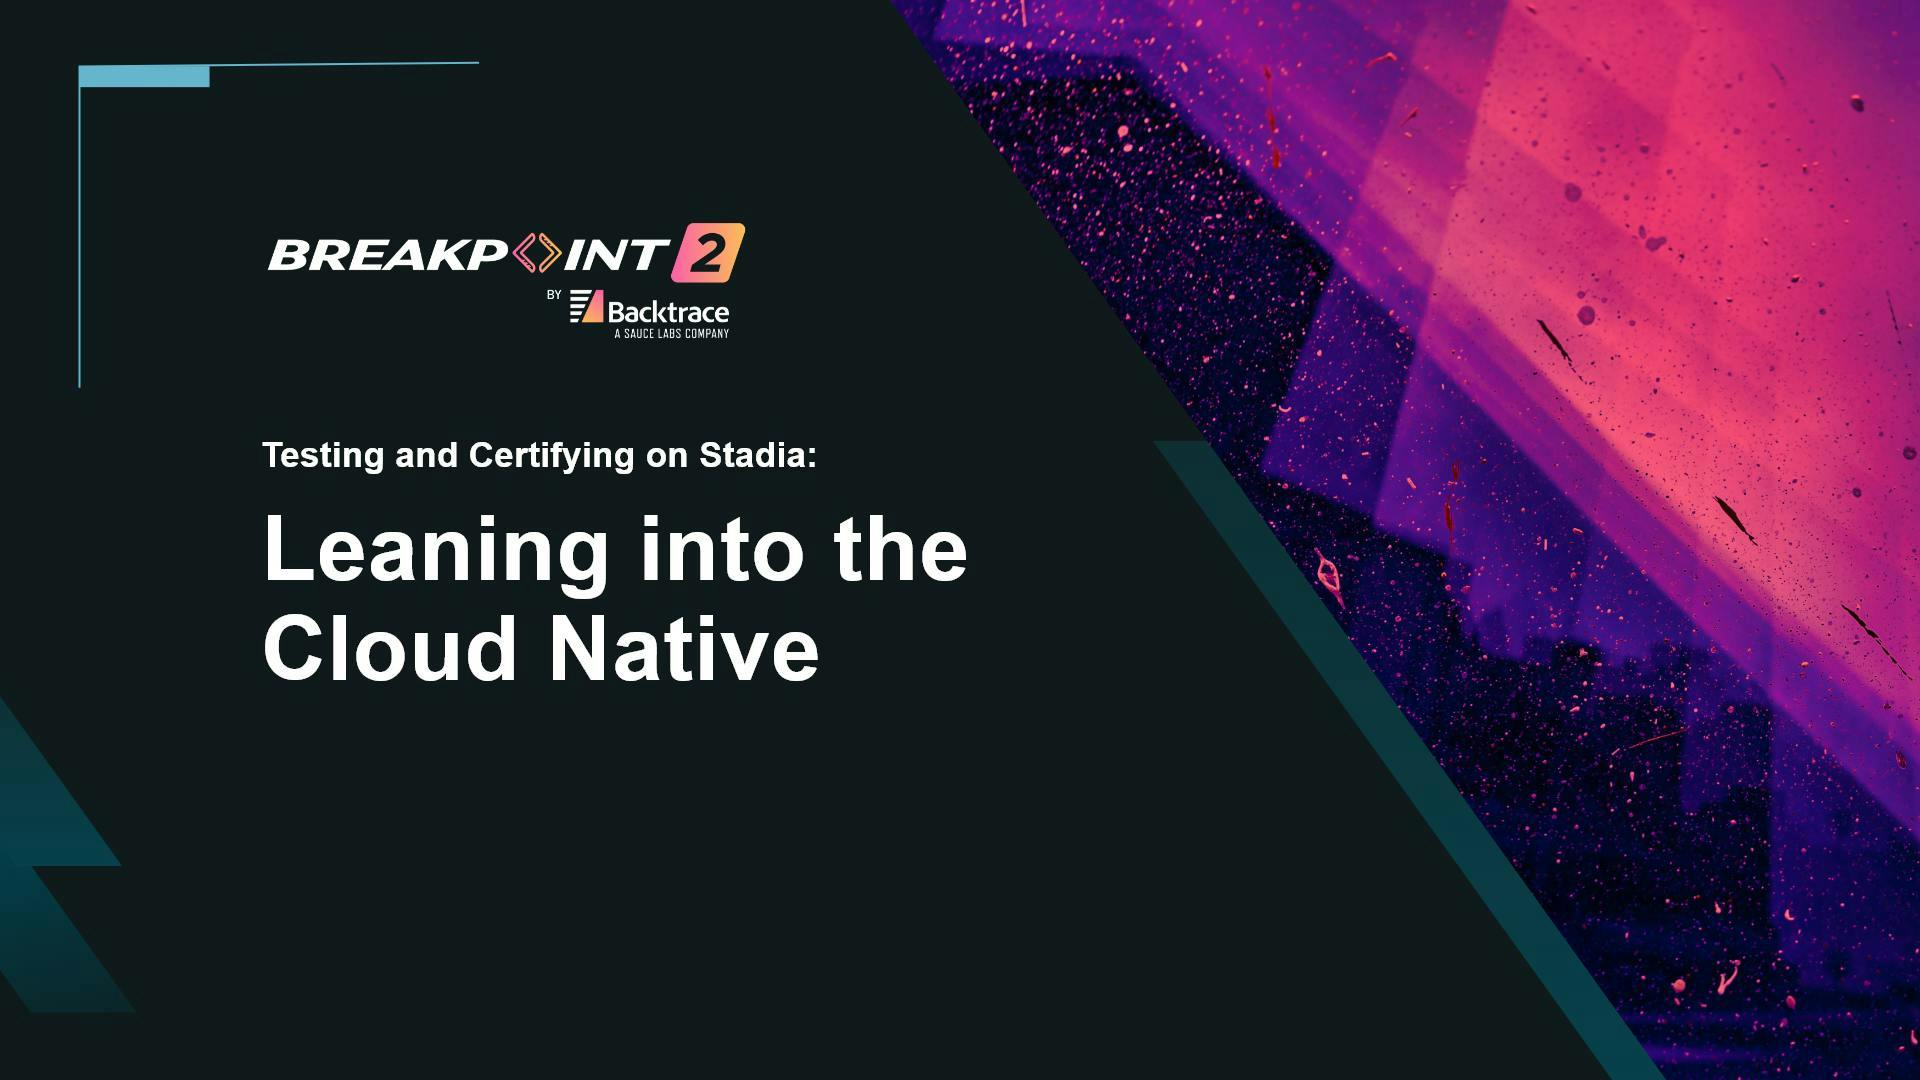 Testing and Certifying on Stadia: Leaning into the Cloud Native